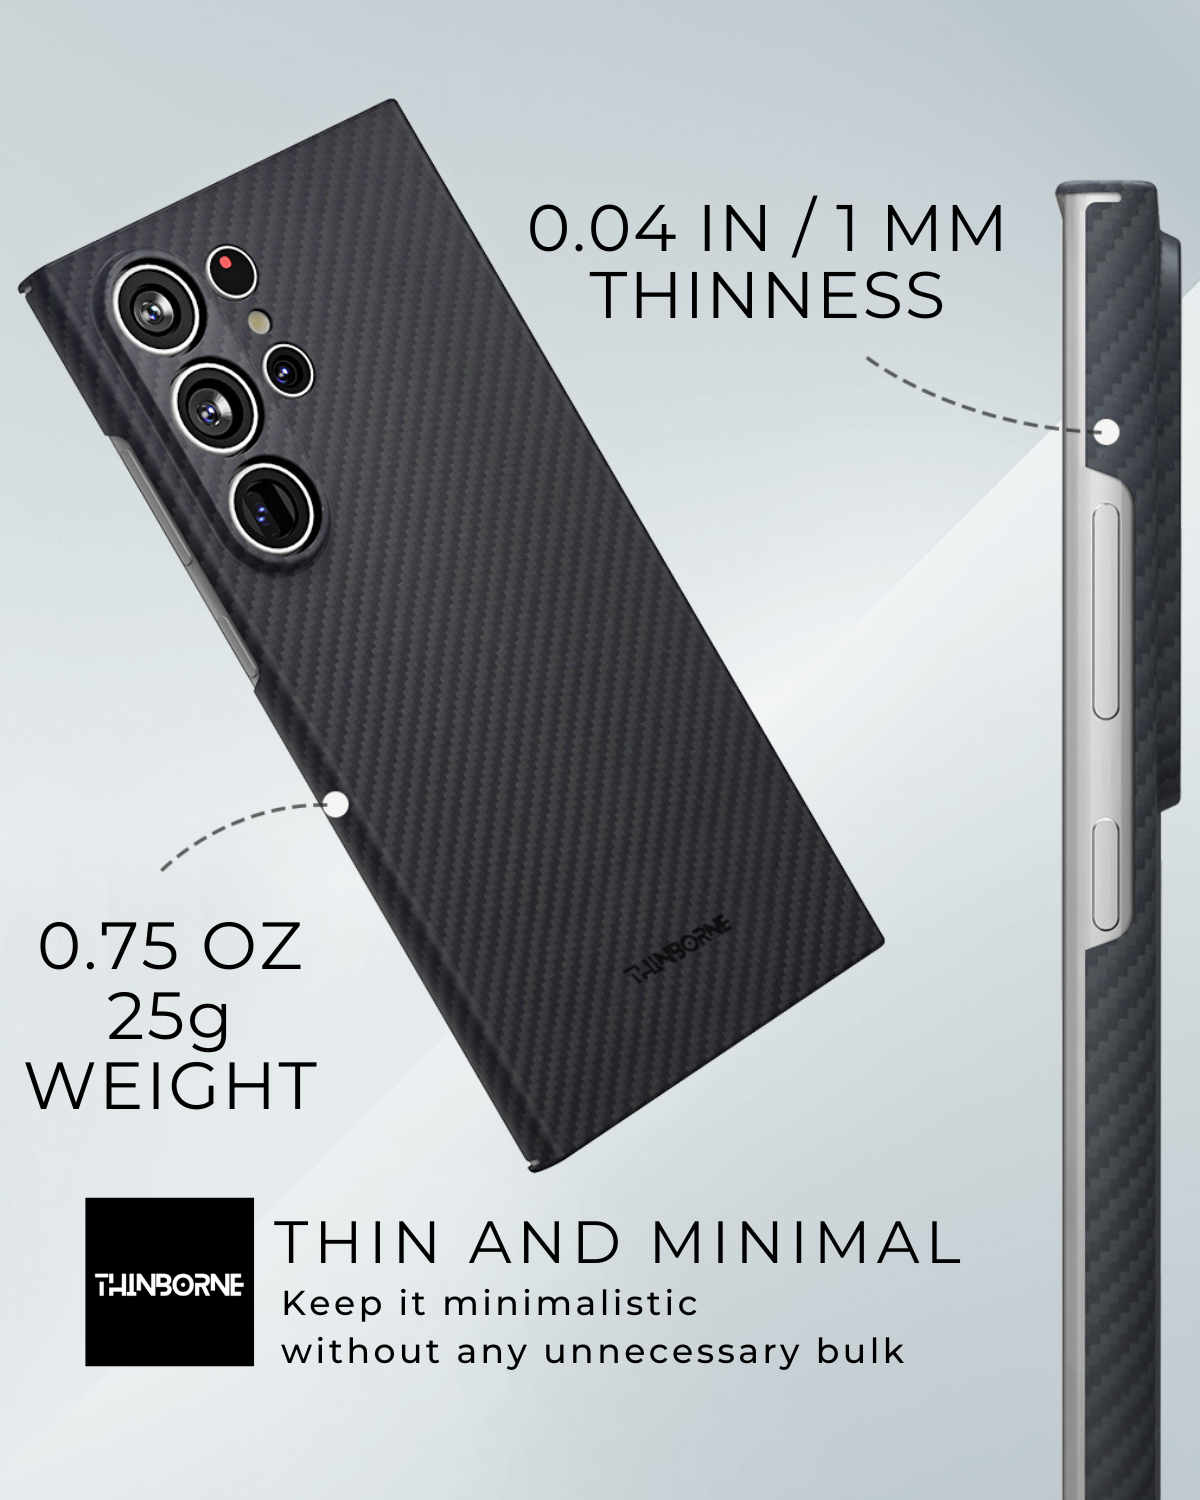 showing the weight (0.75 oz) and 0.04 In THIN AND MINIMAL OF THE ARAMID FIBER SAMSUNG GALAXY S24 ULTRA THIN CASE